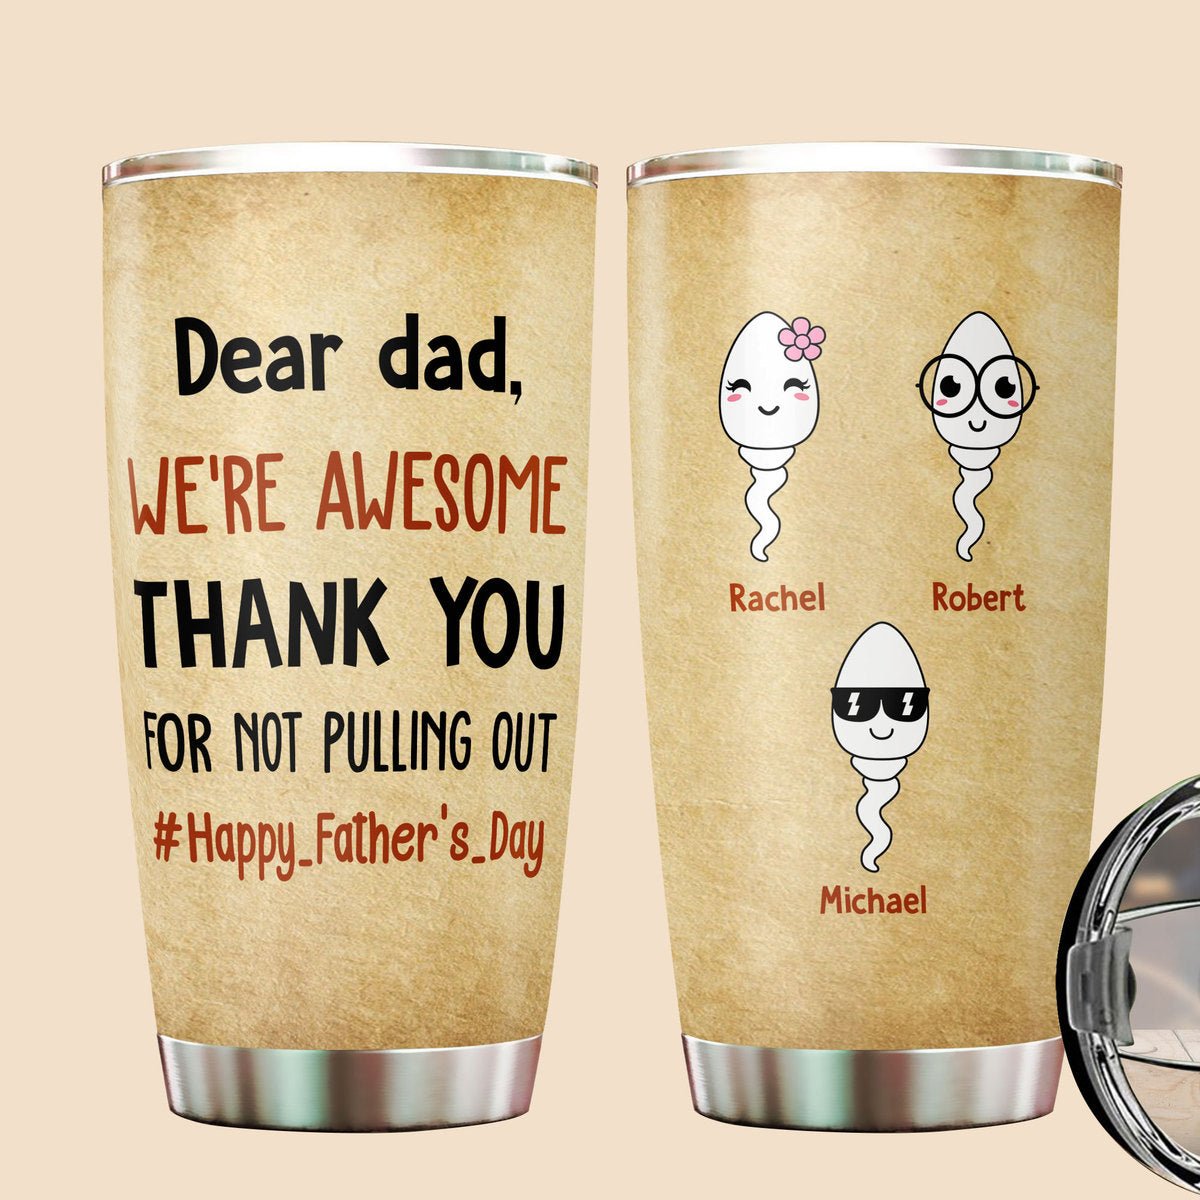 Dear Dad, We're Awesome - Personalized Tumbler - Best Gift For Father - Giftago